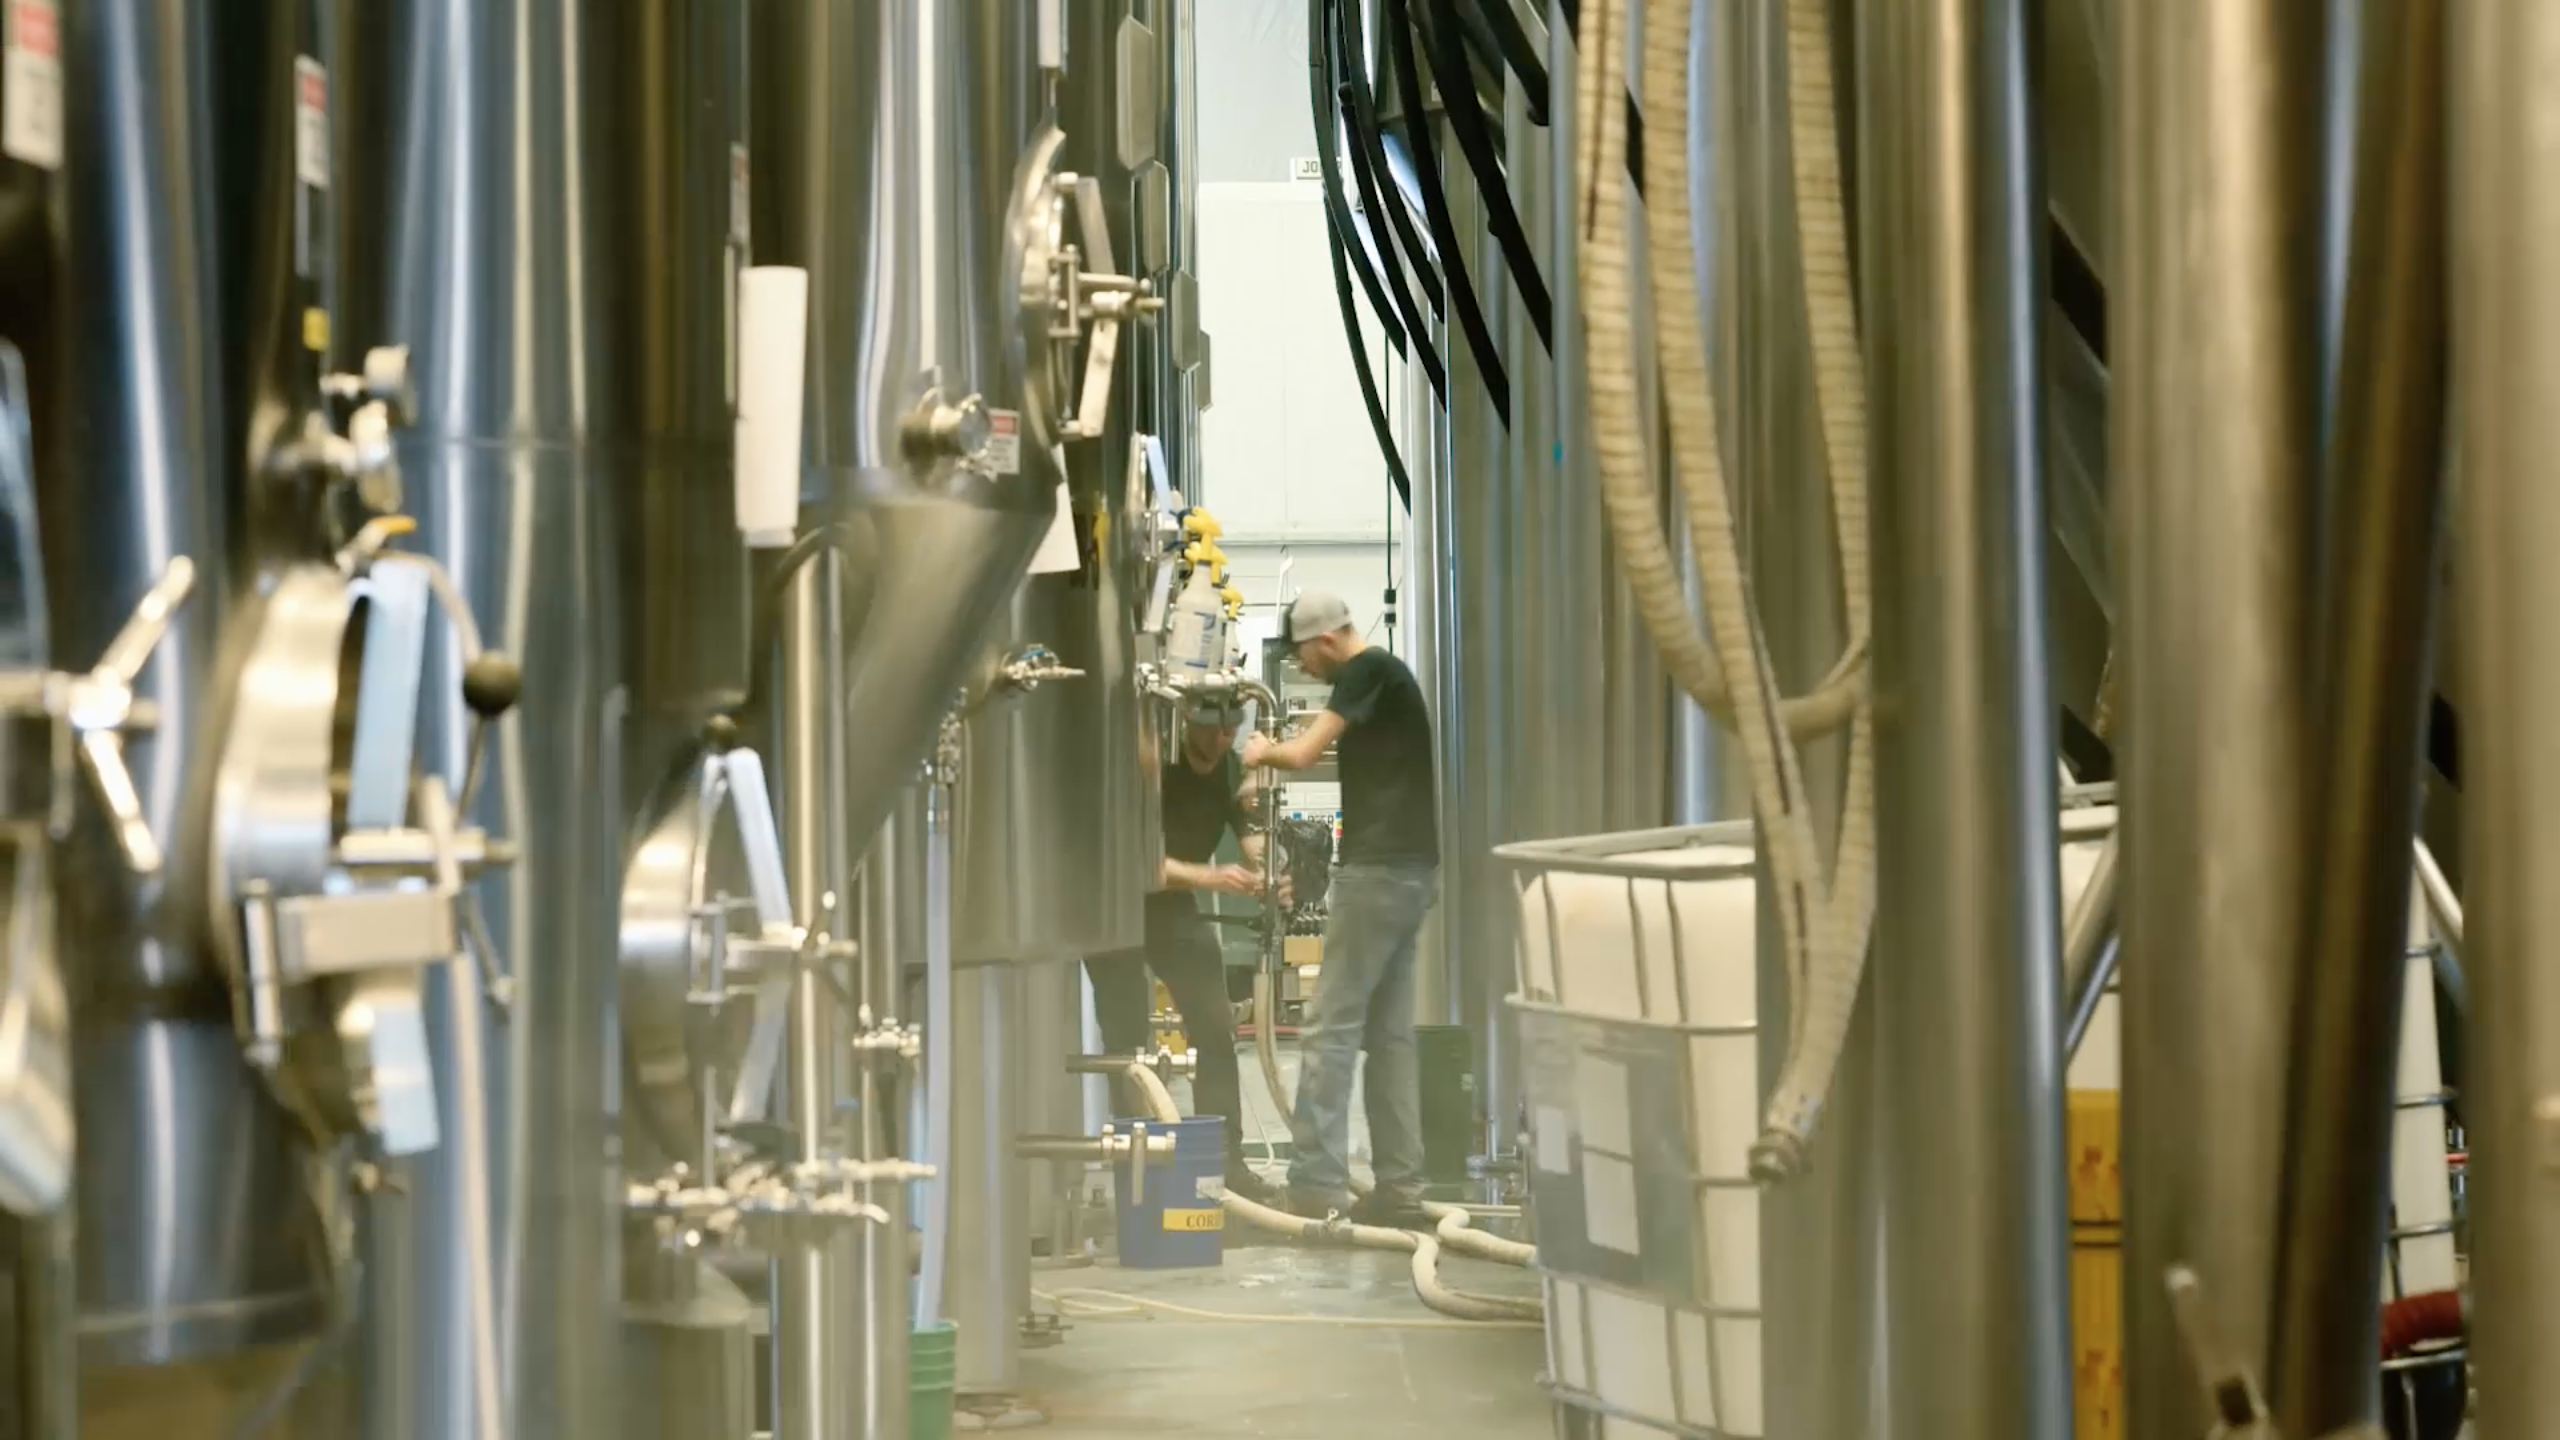 Learn More about The Brewery